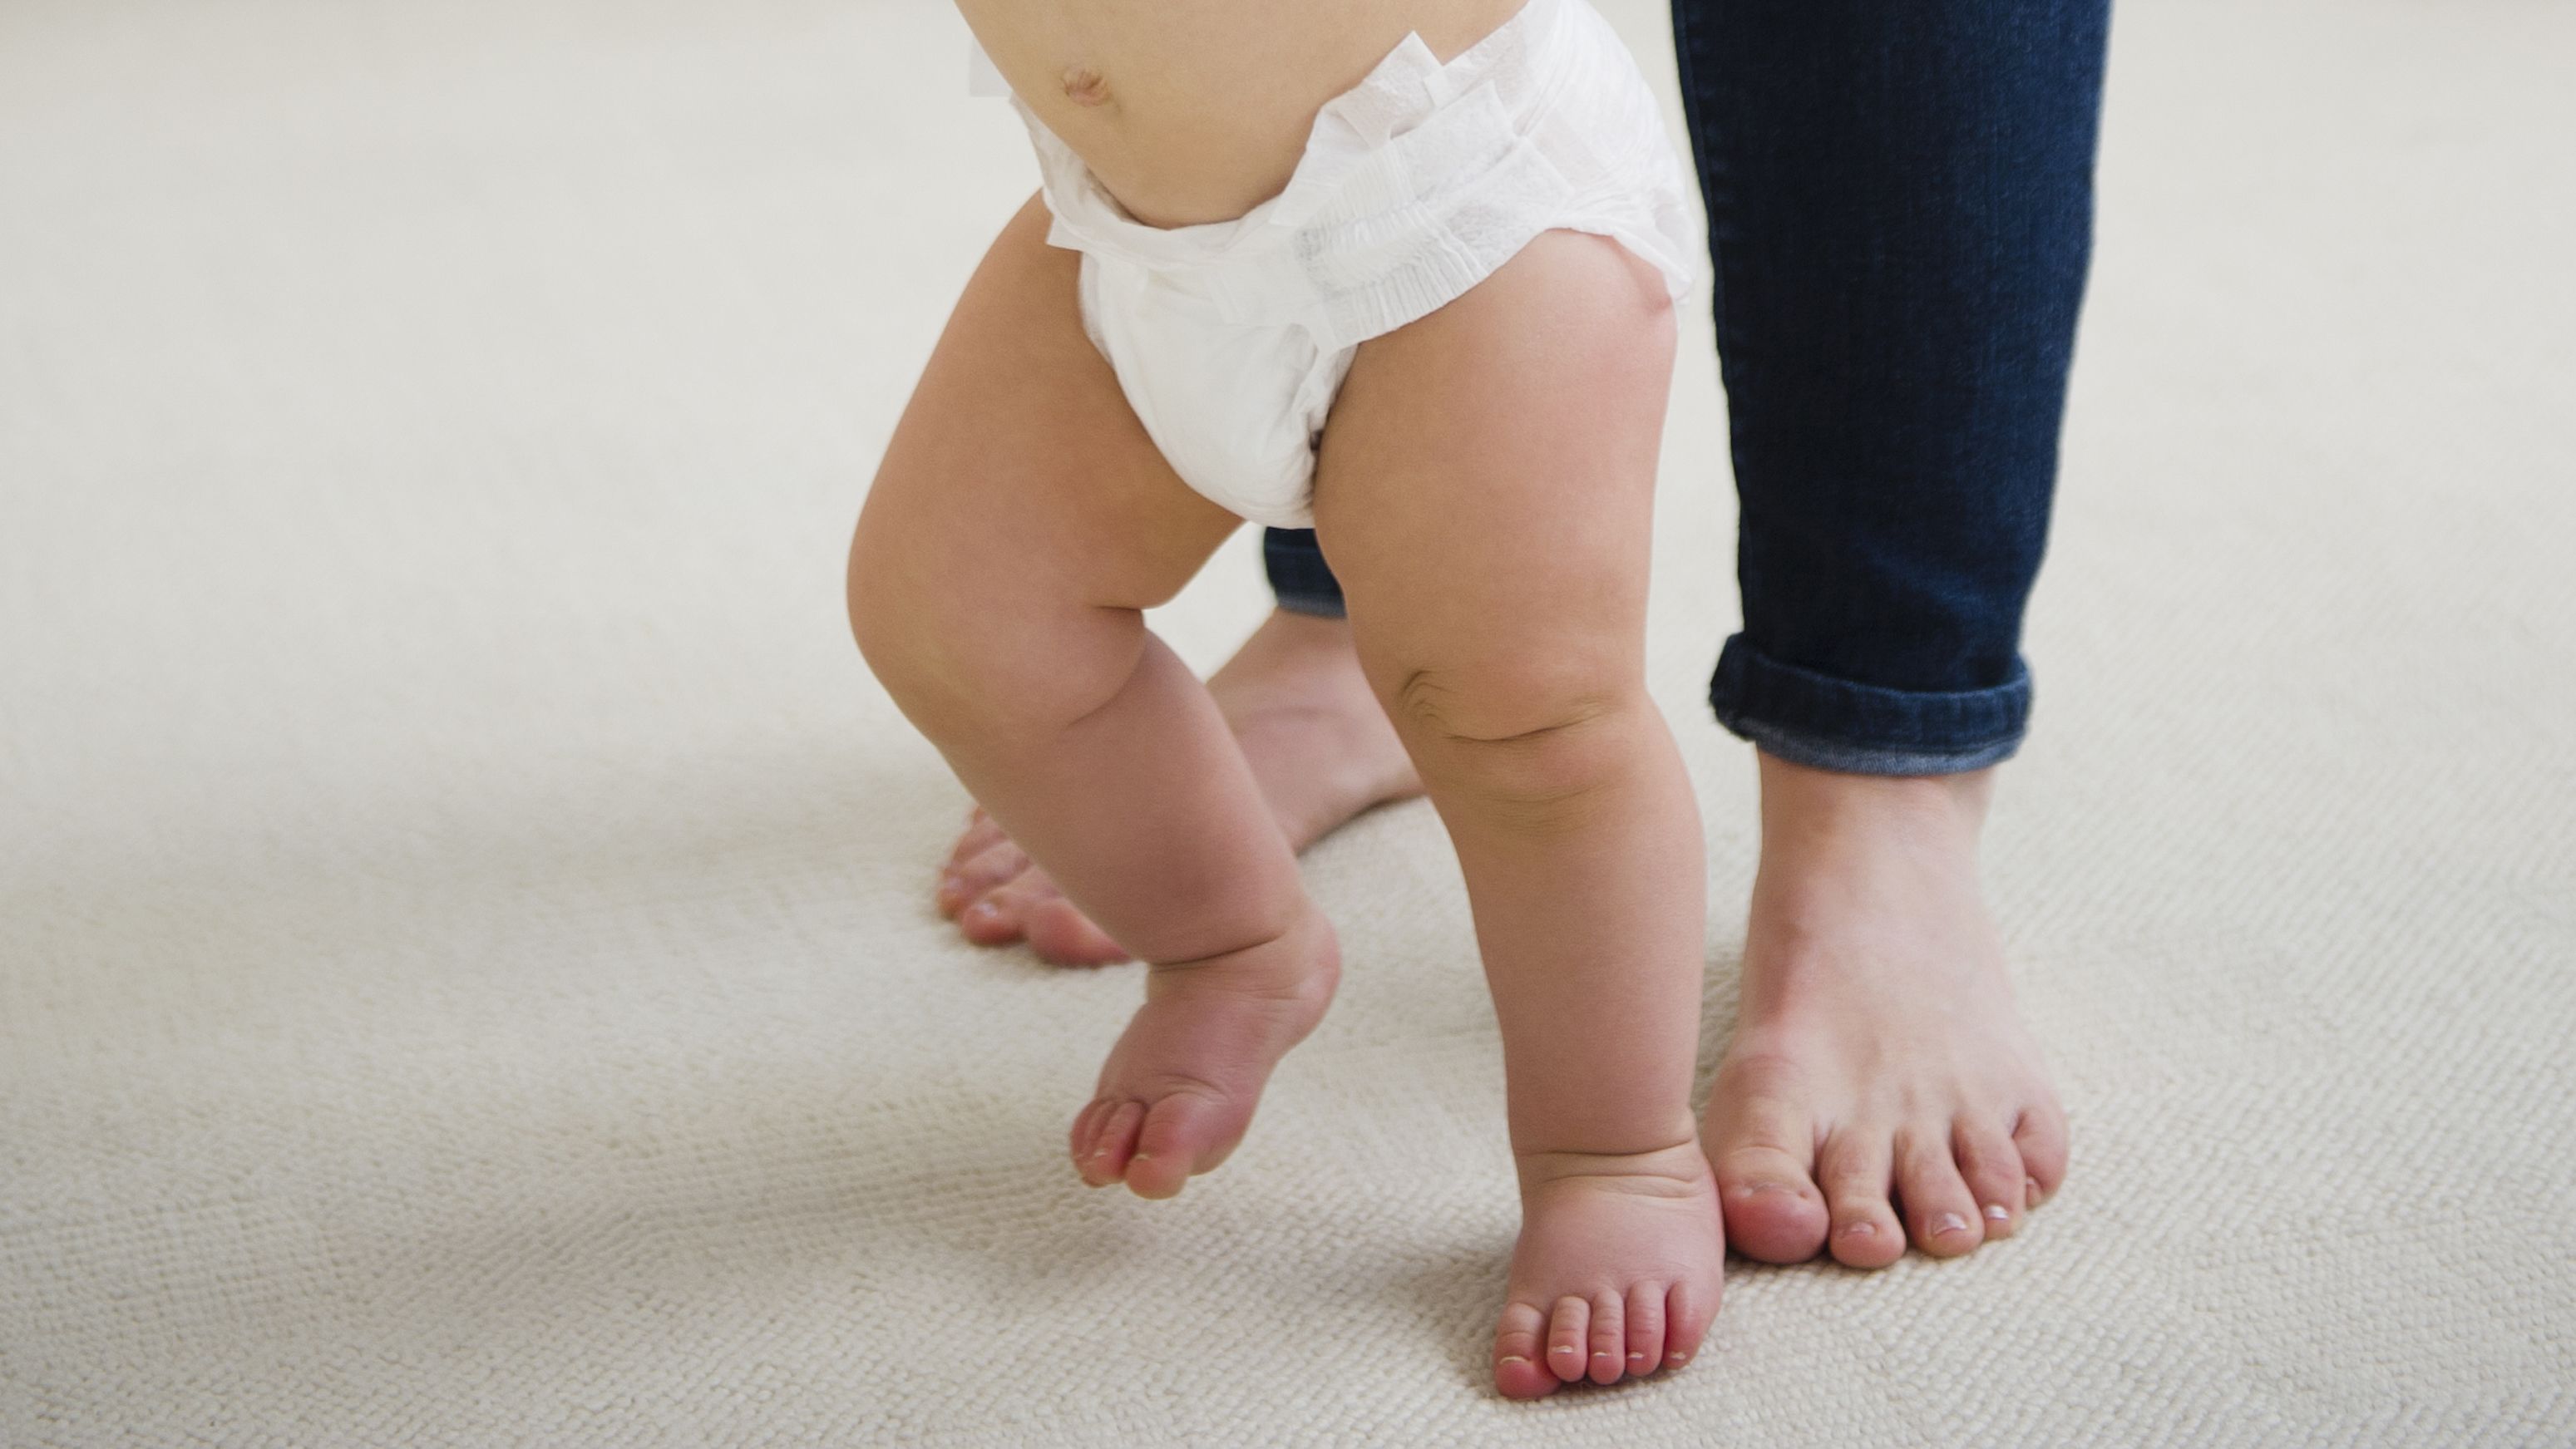 At what age do you think it's appropriate to stop wearing diapers or pull- ups when you are potty training? - Quora